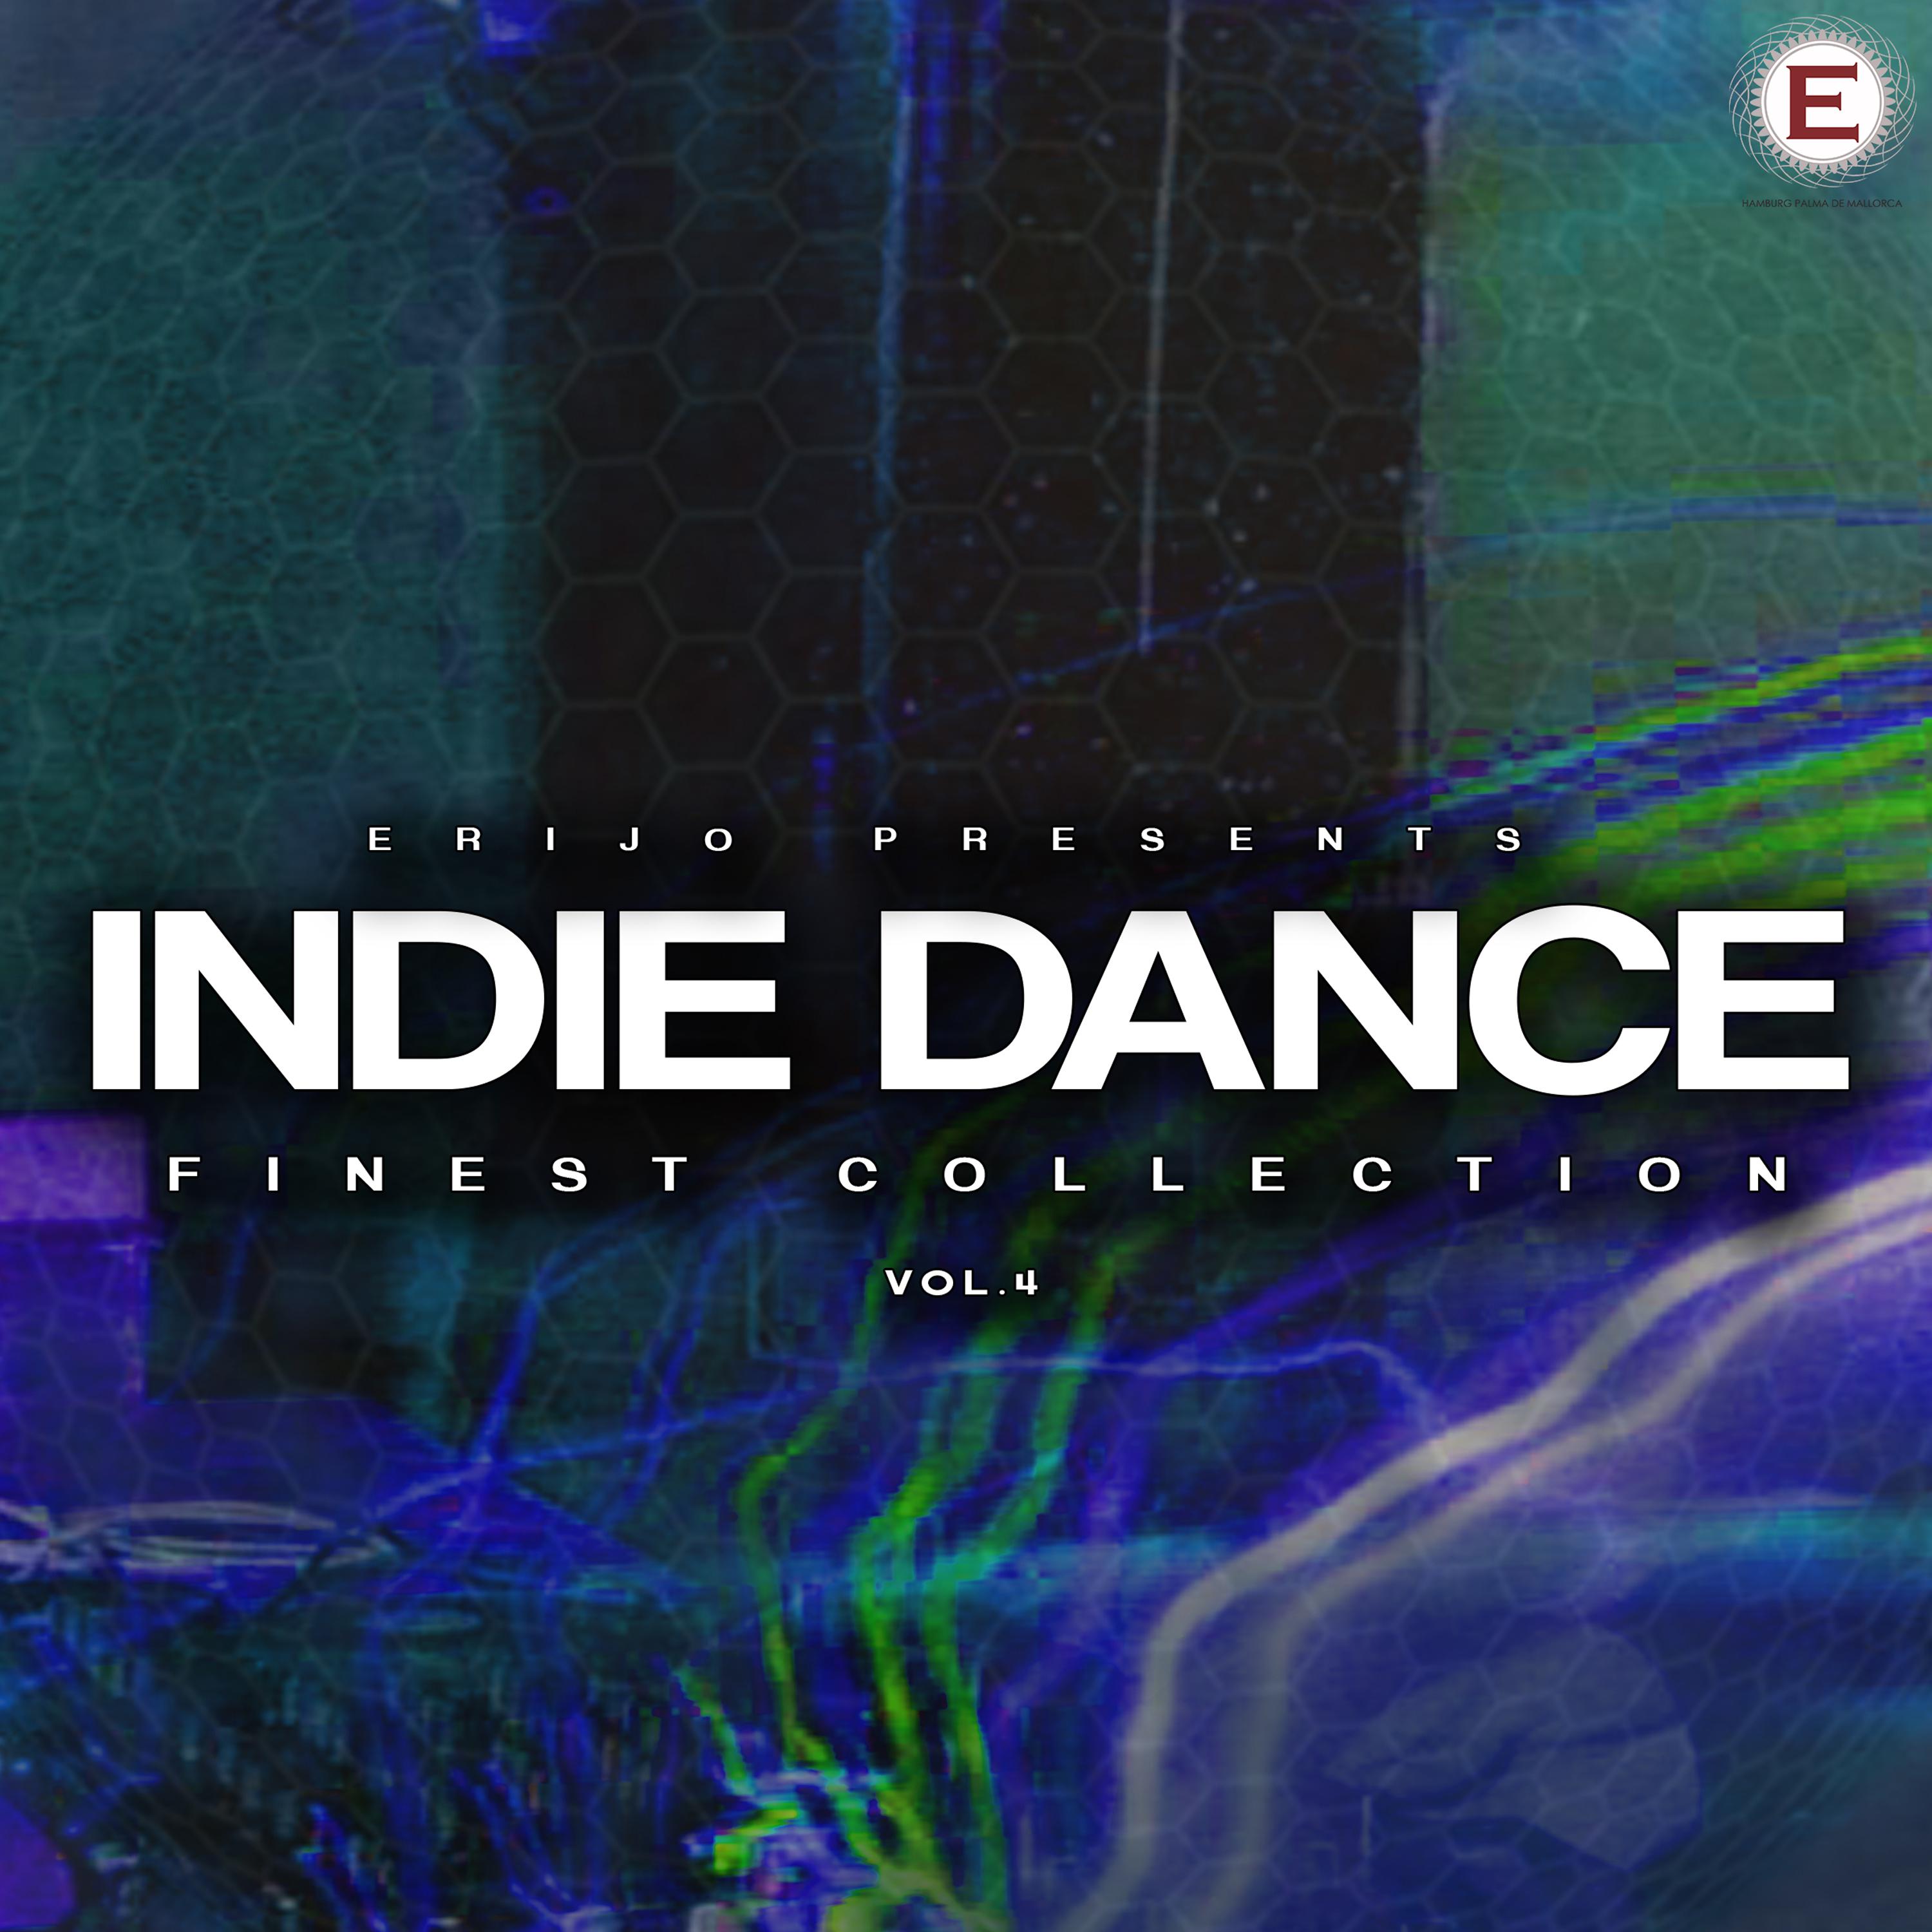 Indie Dance Finest Collection, Vol. 4